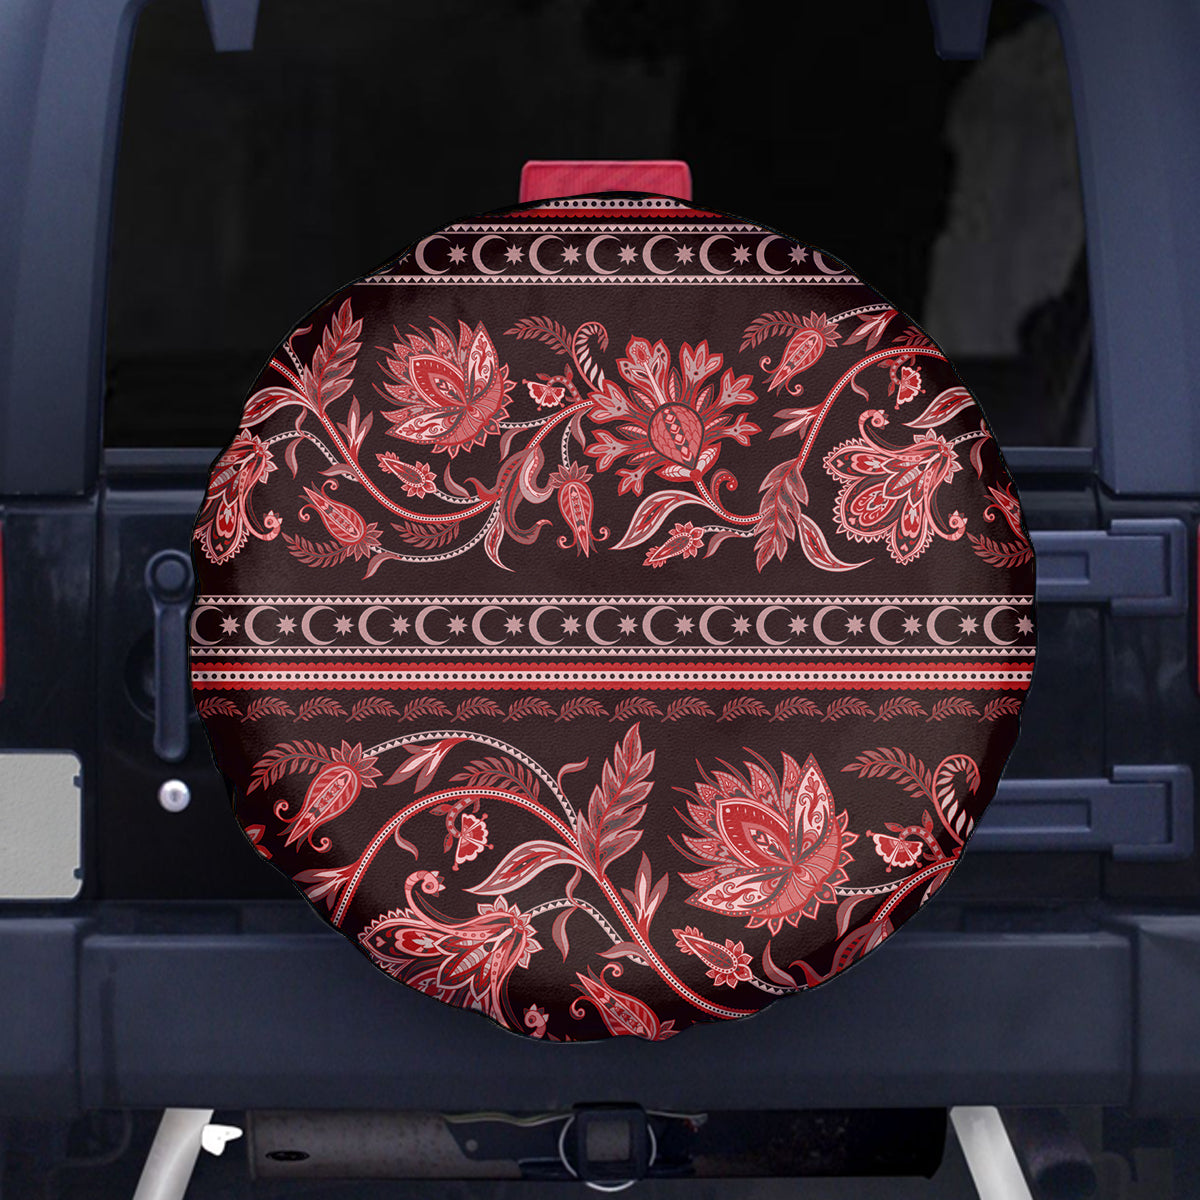 azerbaijan-spare-tire-cover-traditional-pattern-ornament-with-flowers-buta-red